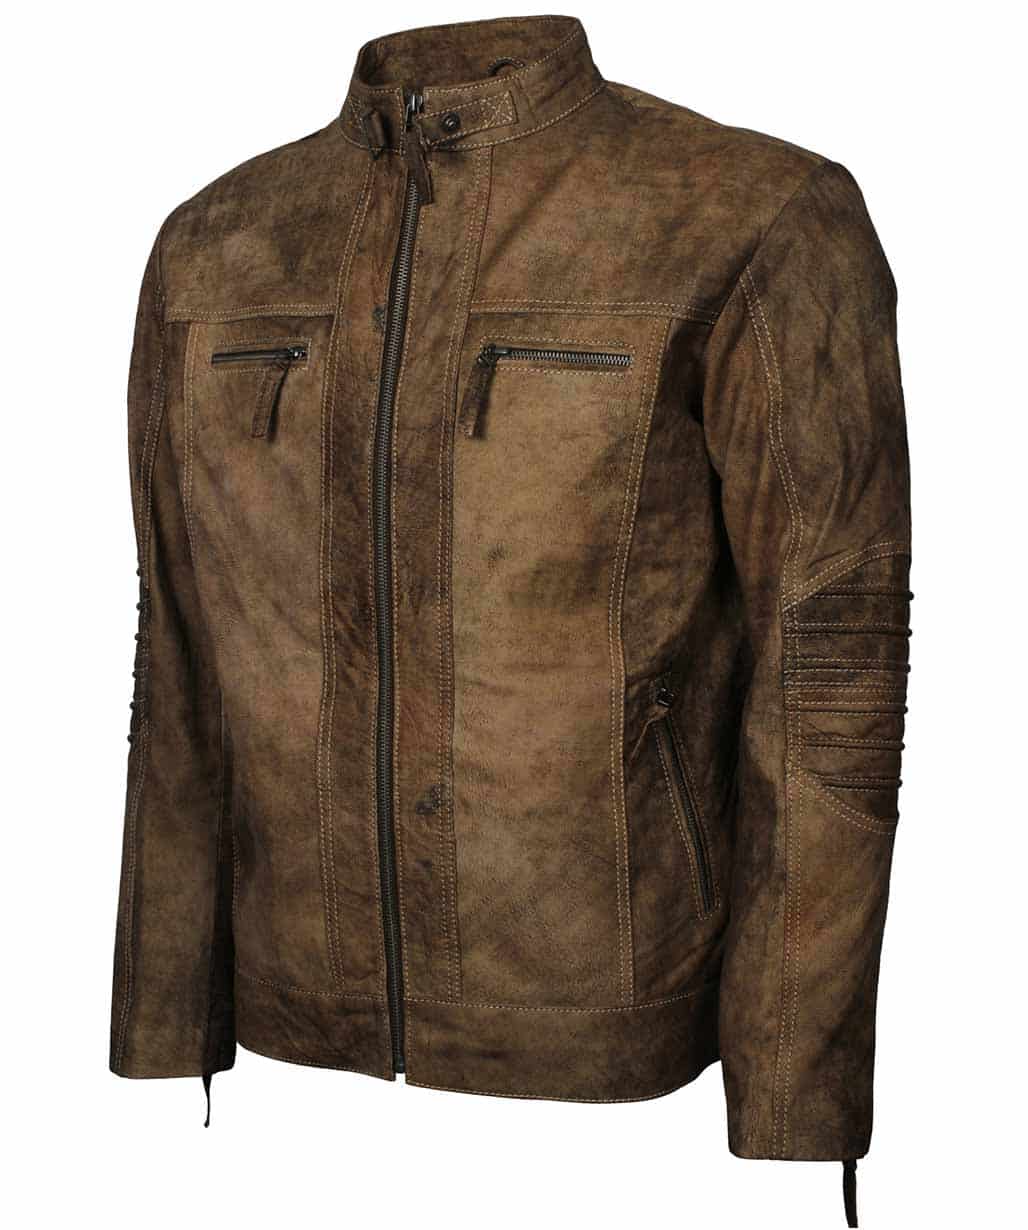 tryphone-brown-distressed-leather-jacket-Sale-Free-Shipping